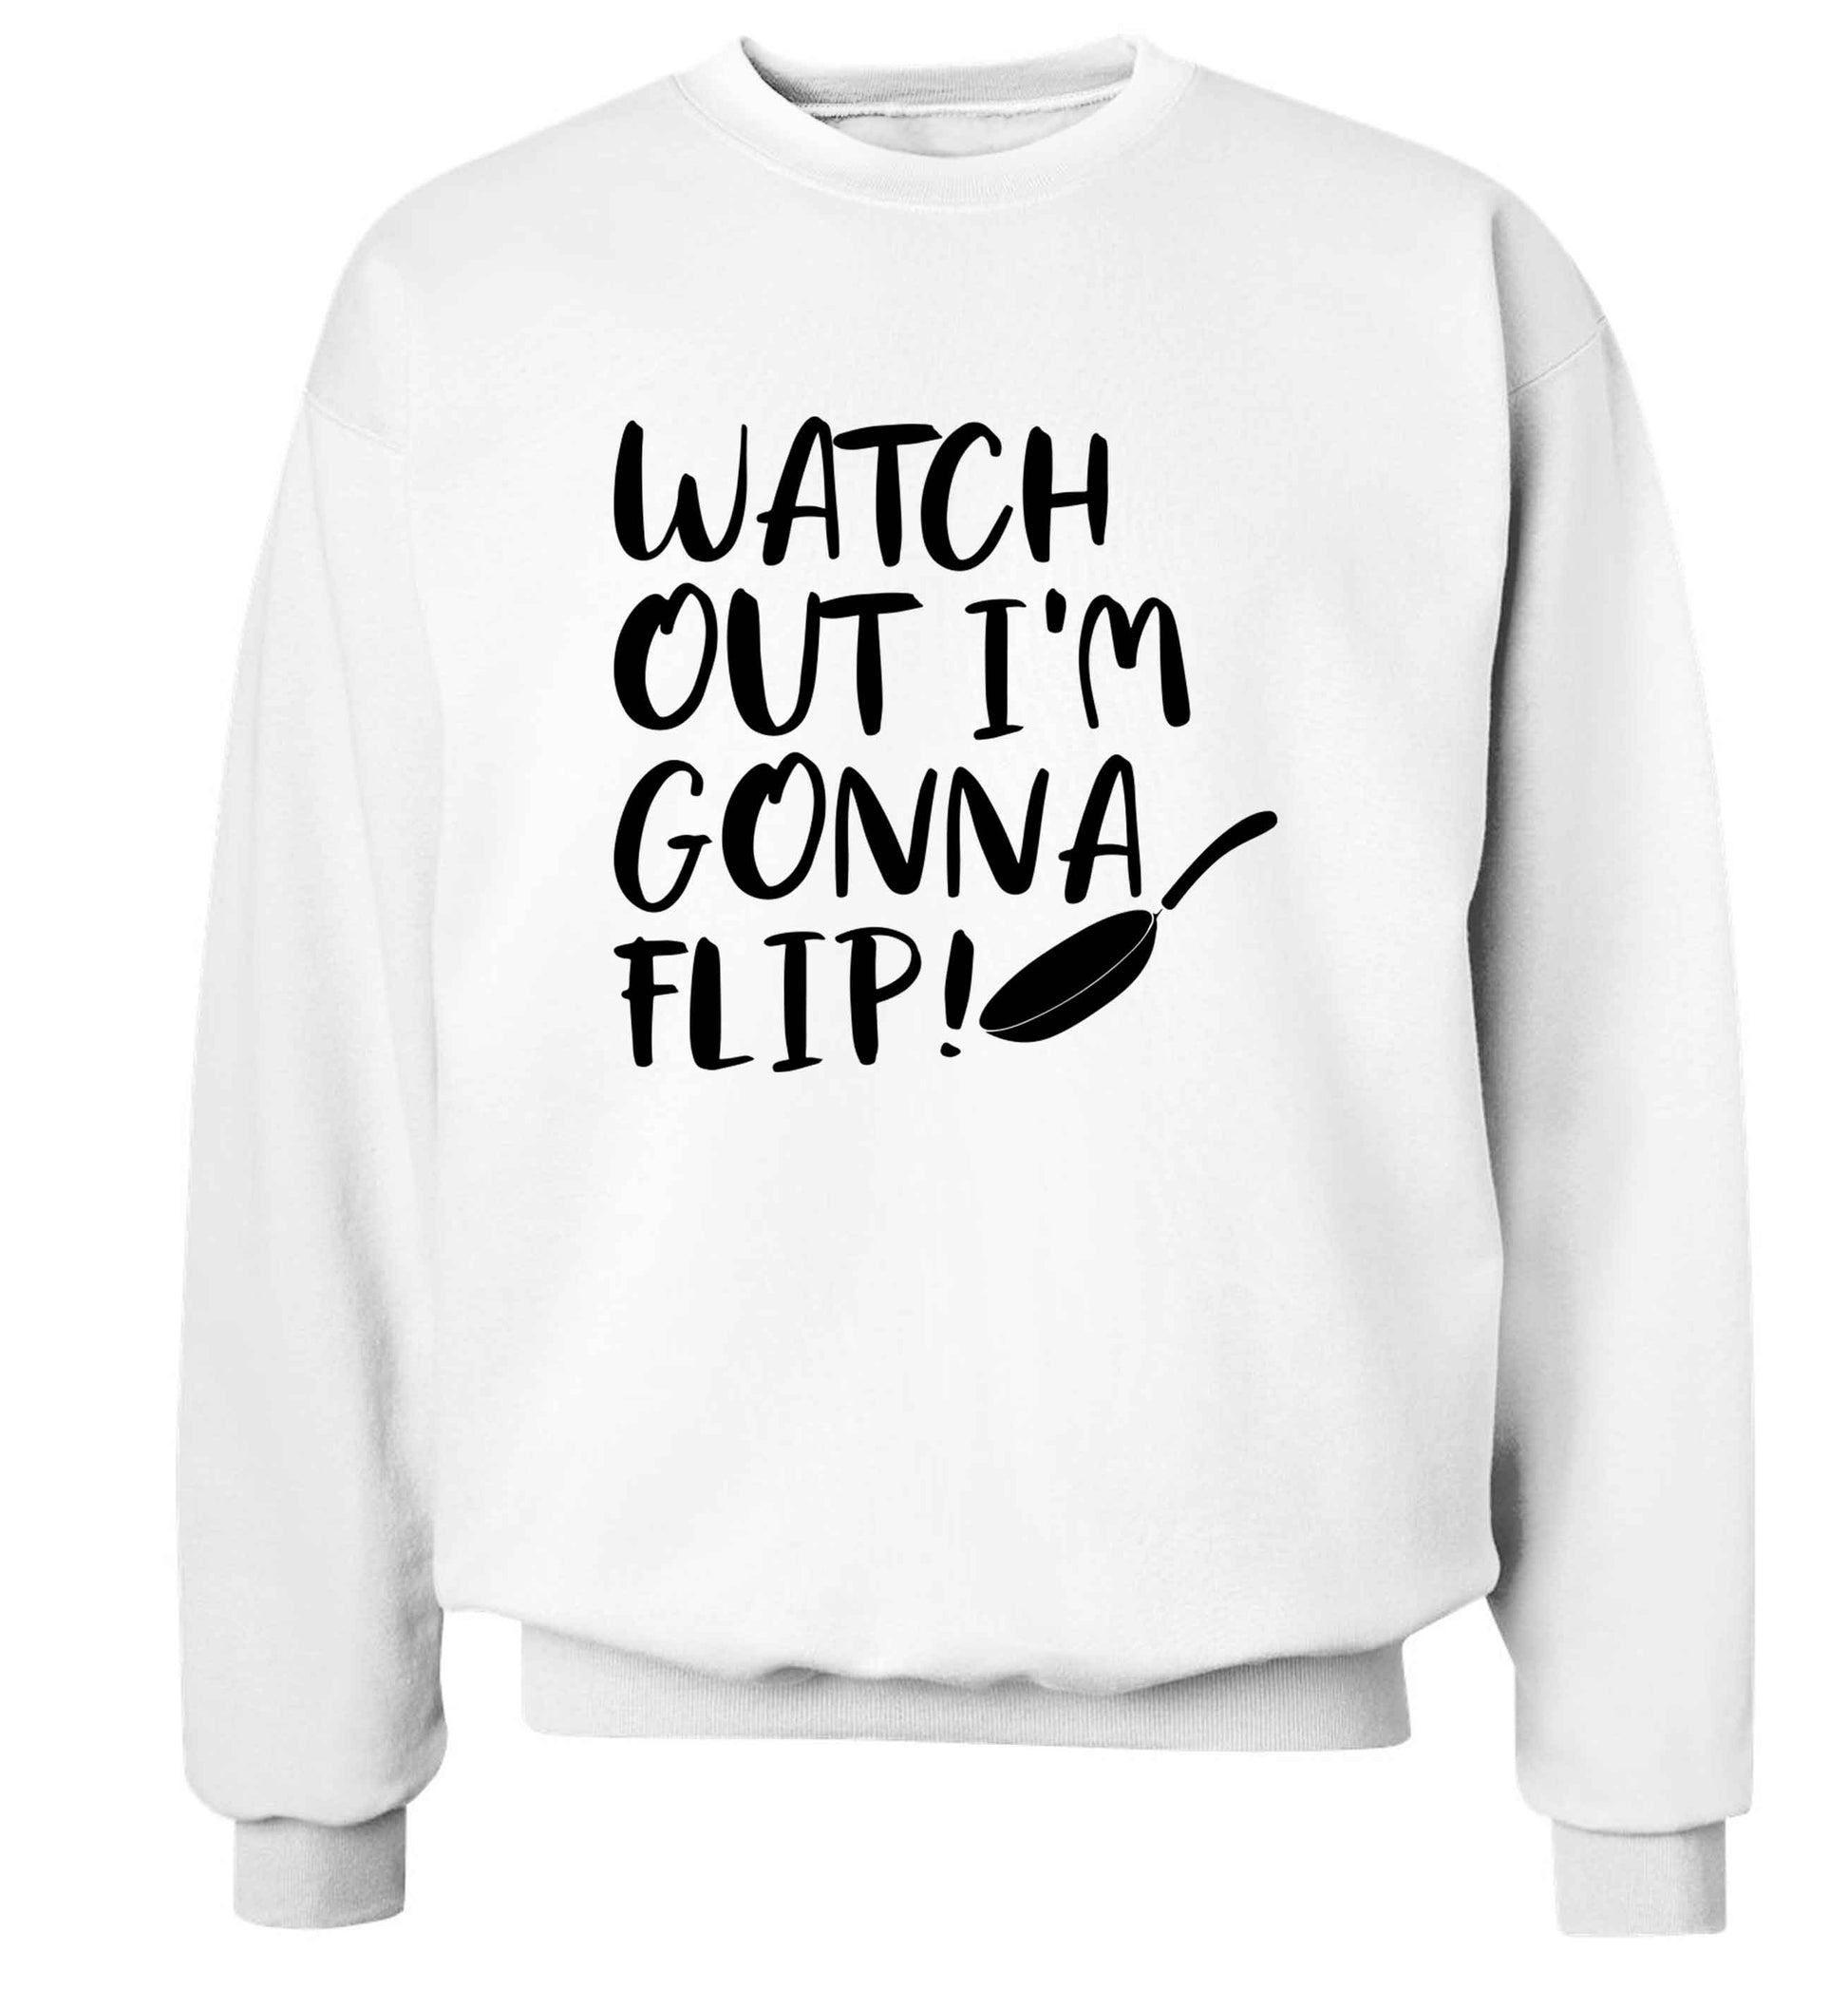 Watch out I'm gonna flip! adult's unisex white sweater 2XL